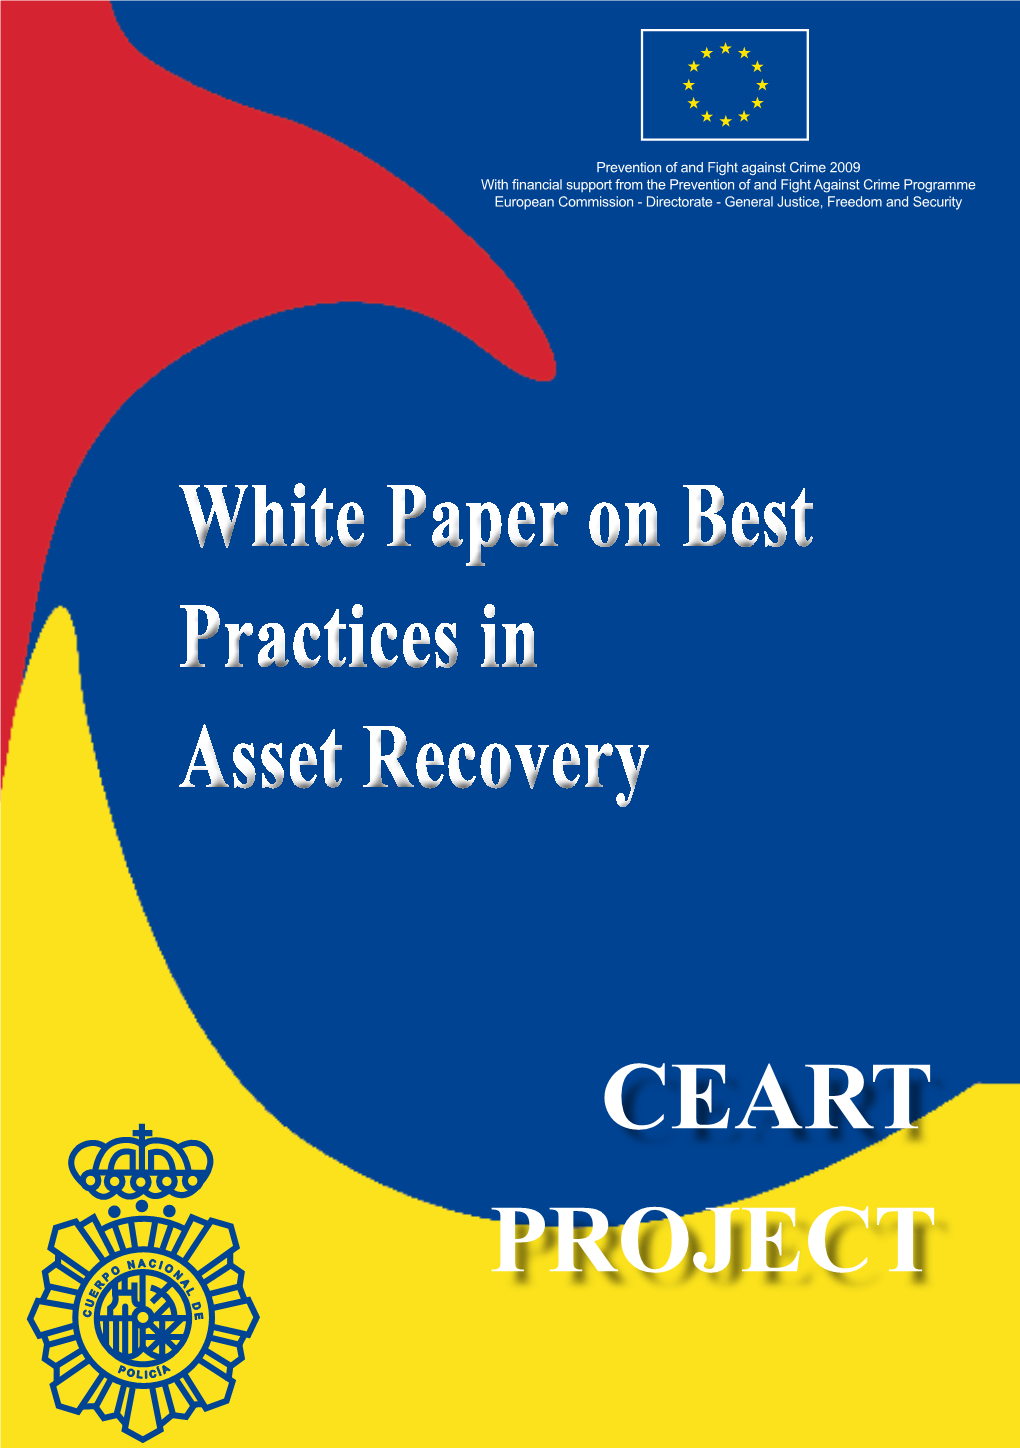 White Paper on Best Practices in Asset Recovery